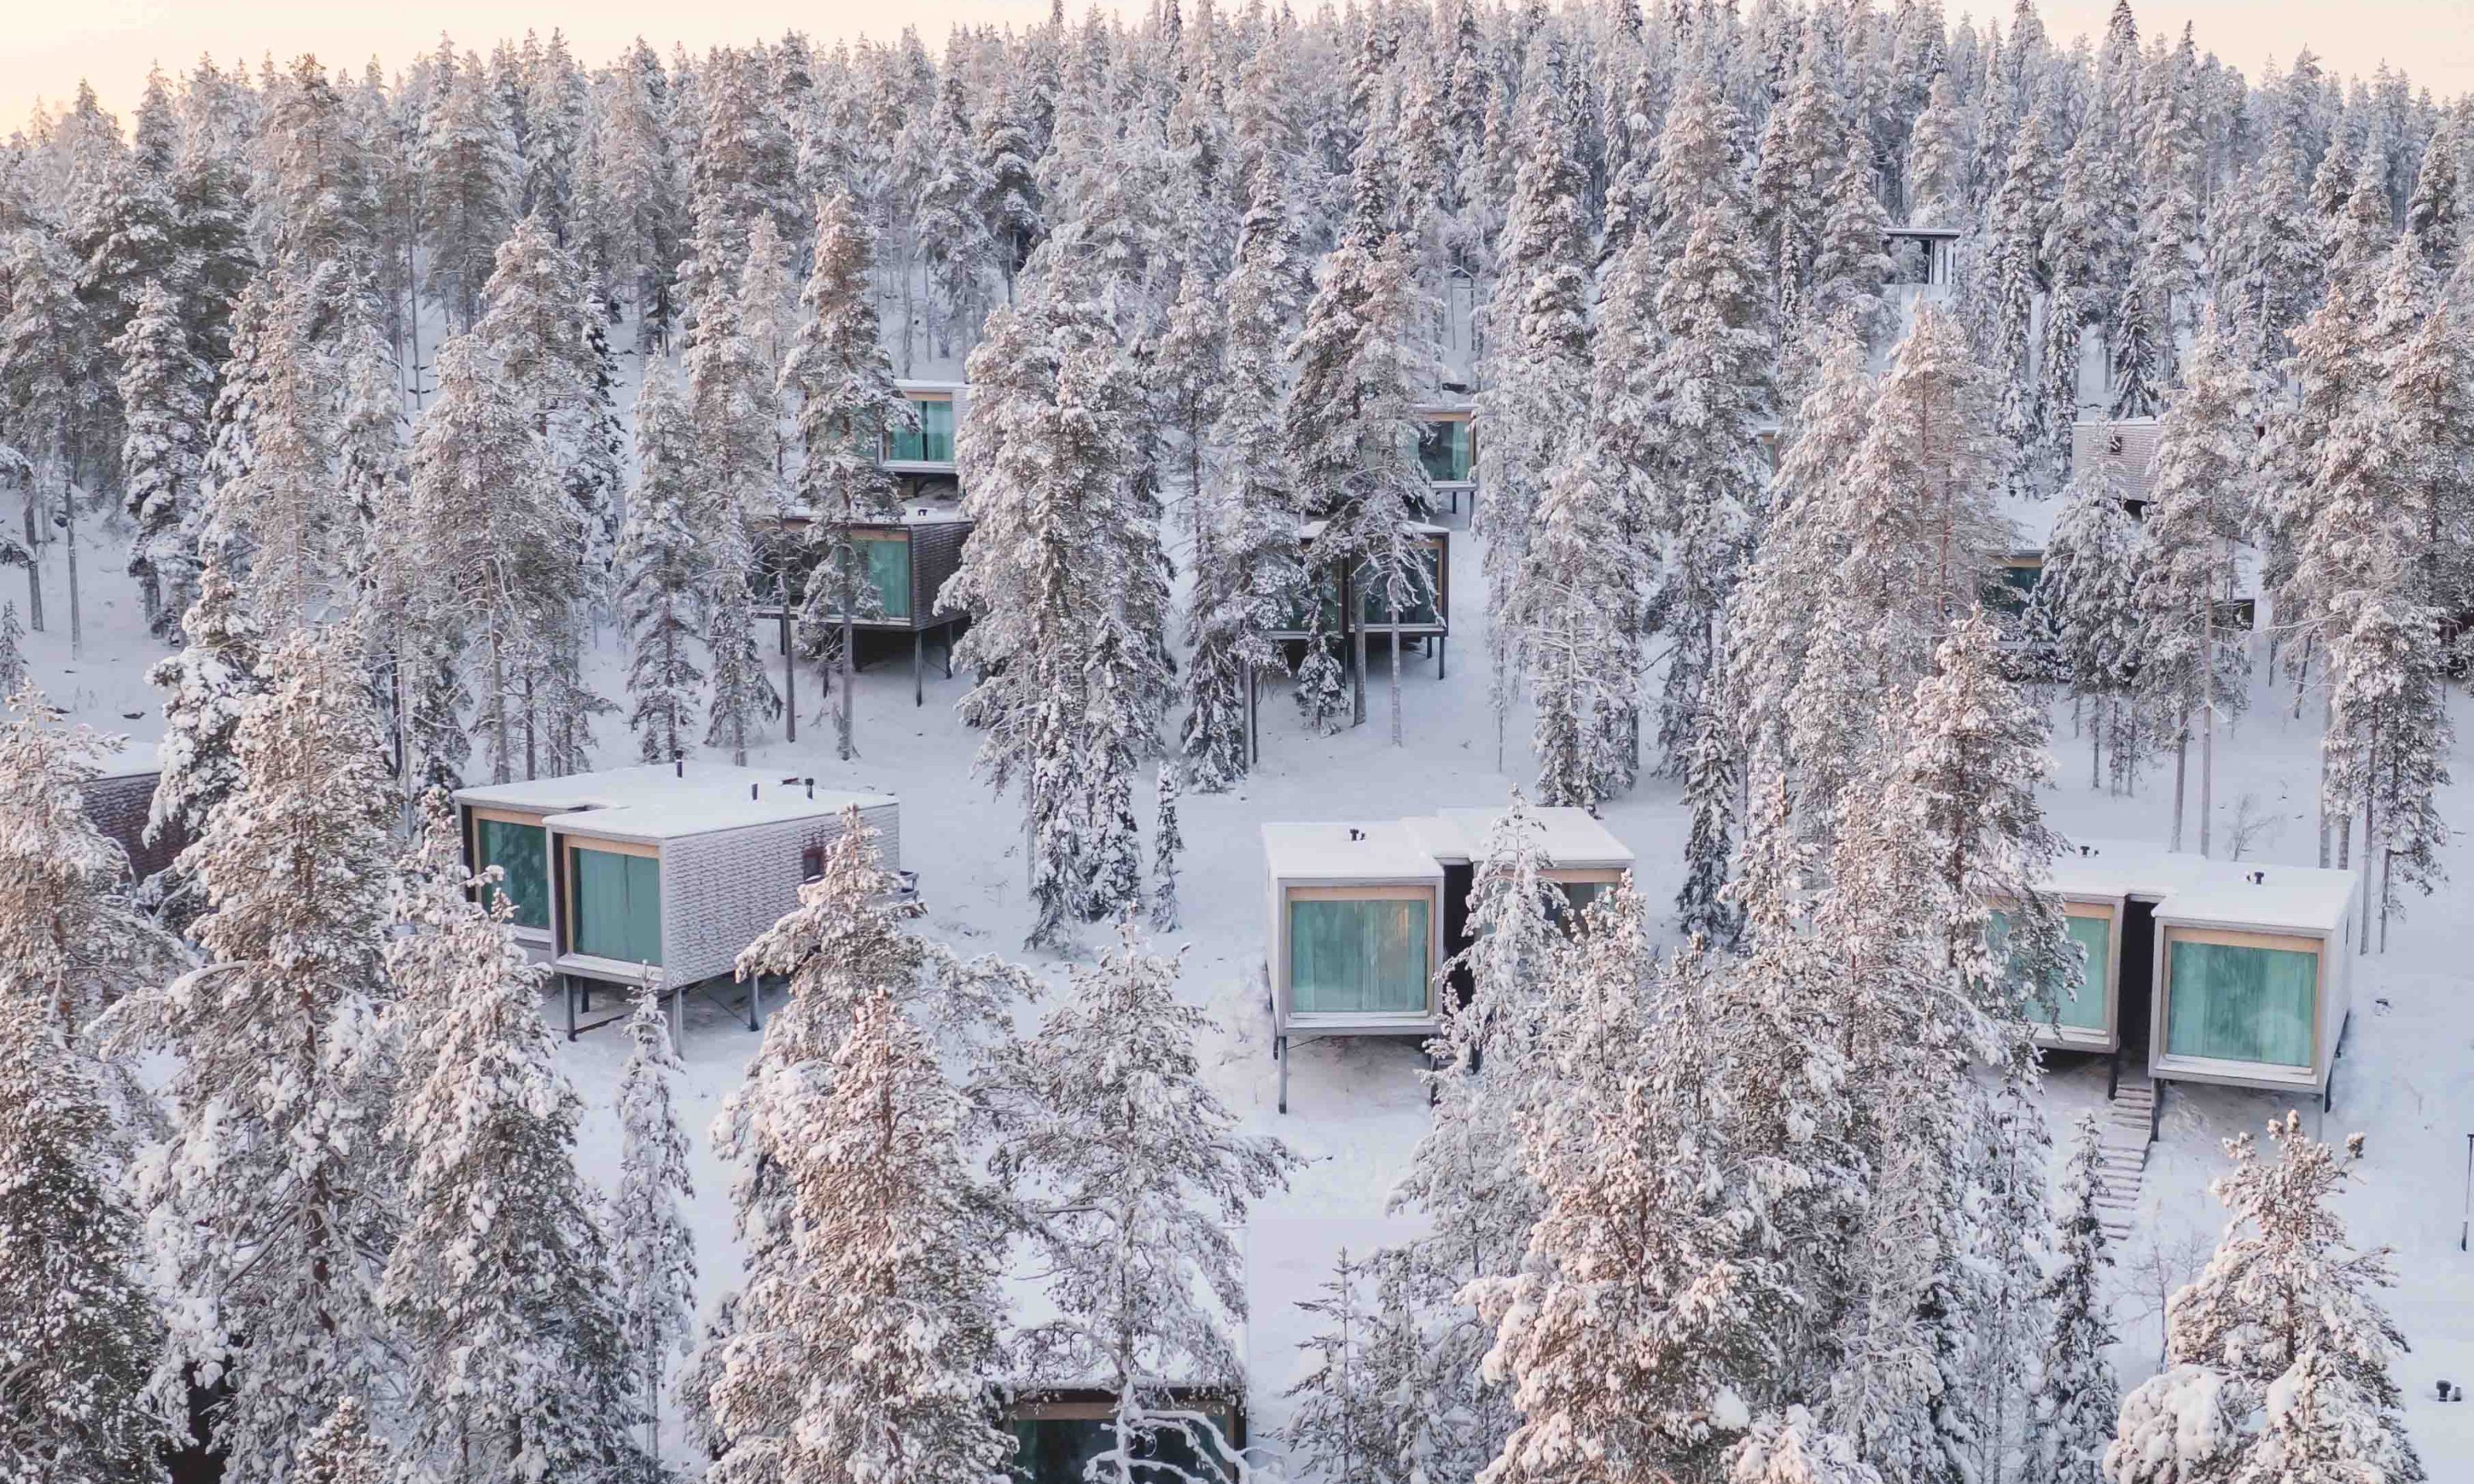 Beautiful winter scenery at Arctic TreeHouse Hotel